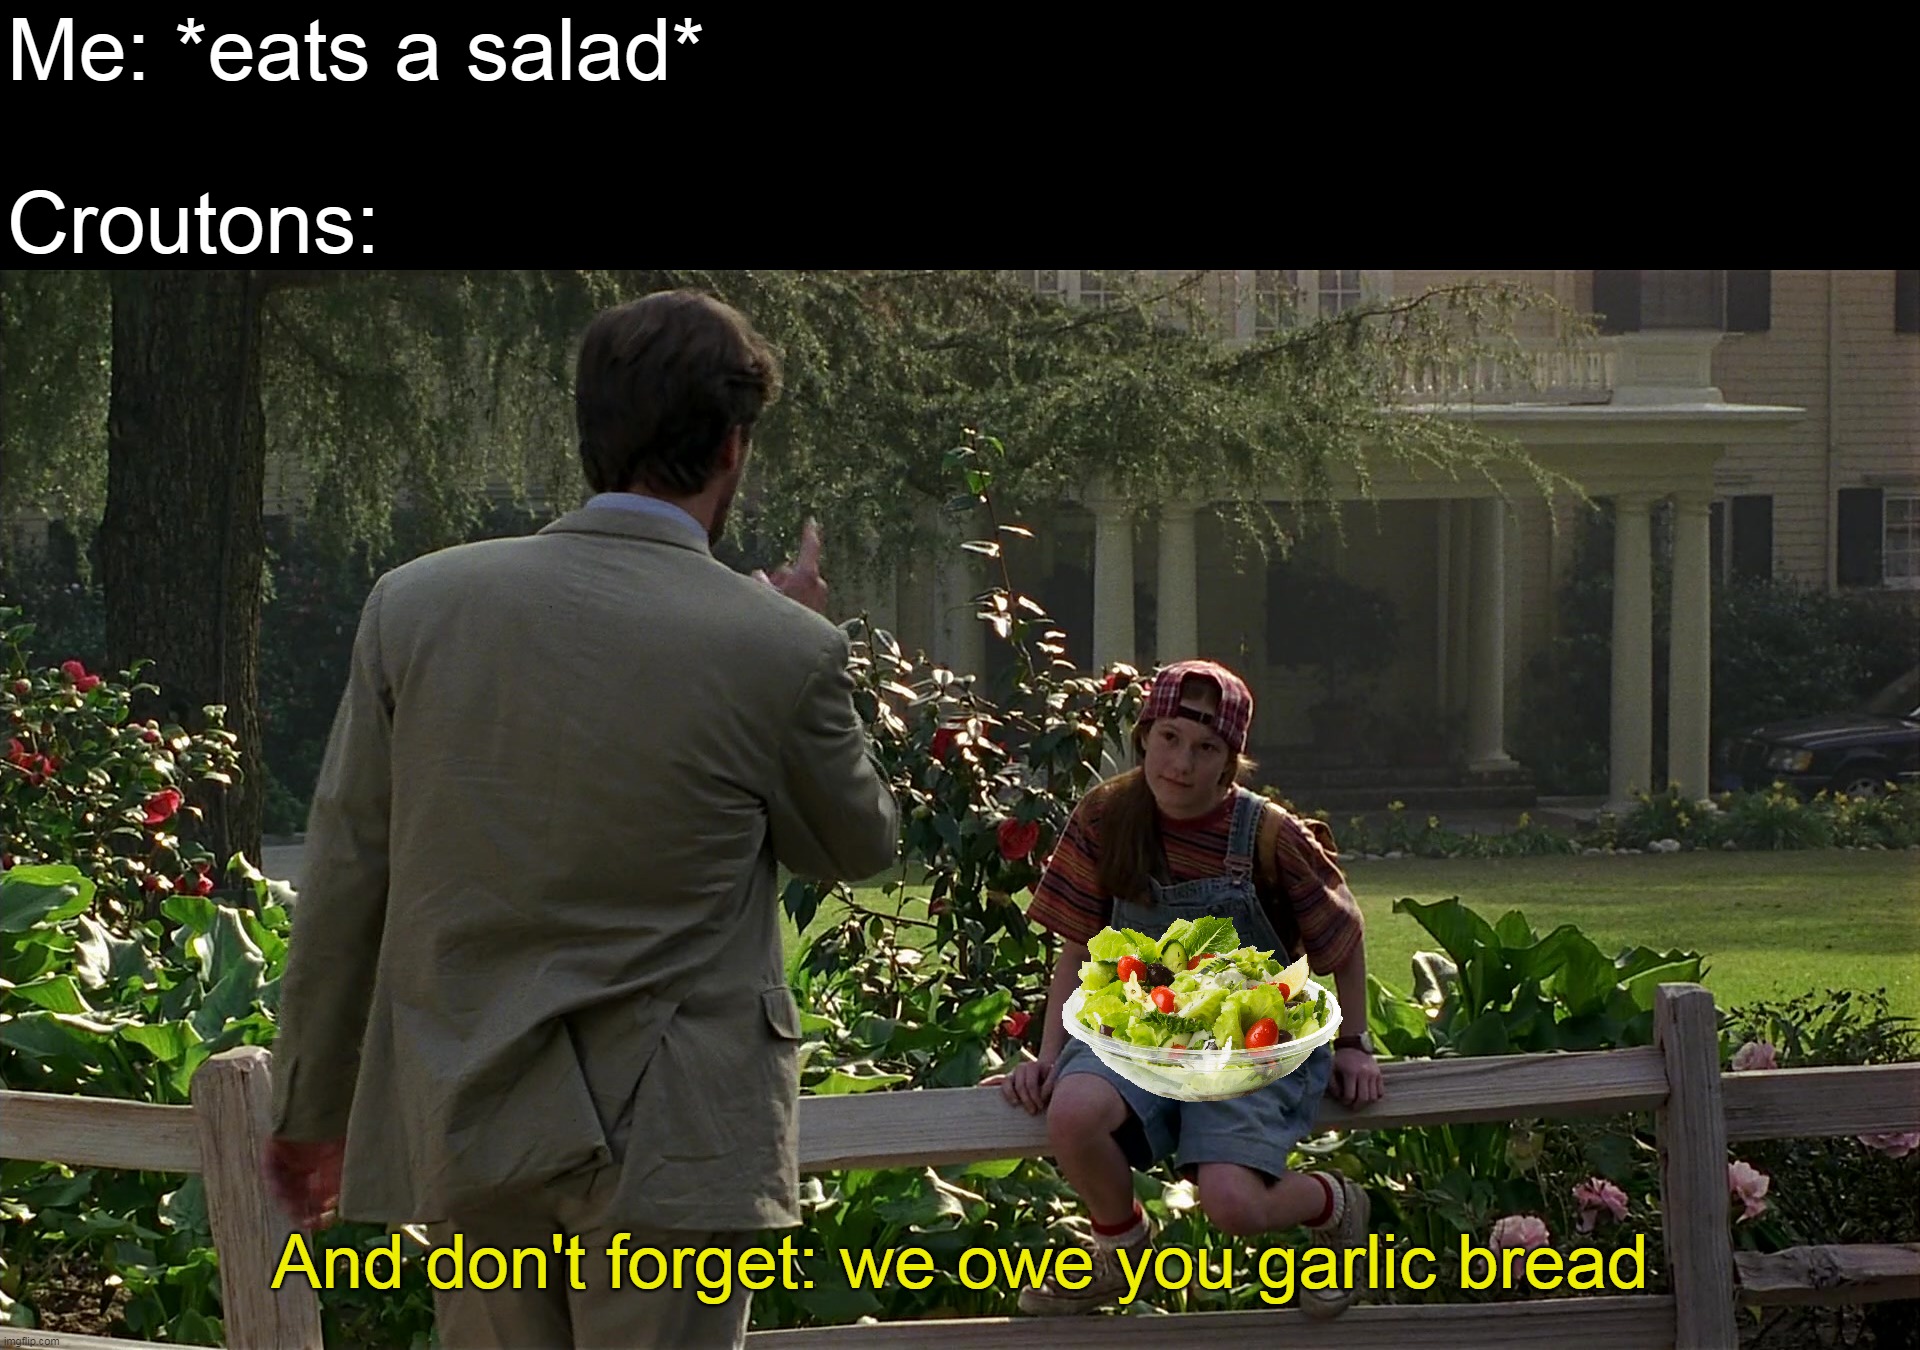 Me: *eats a salad*
 
Croutons:; And don't forget: we owe you garlic bread | image tagged in meme,memes,humor,funny,salad | made w/ Imgflip meme maker